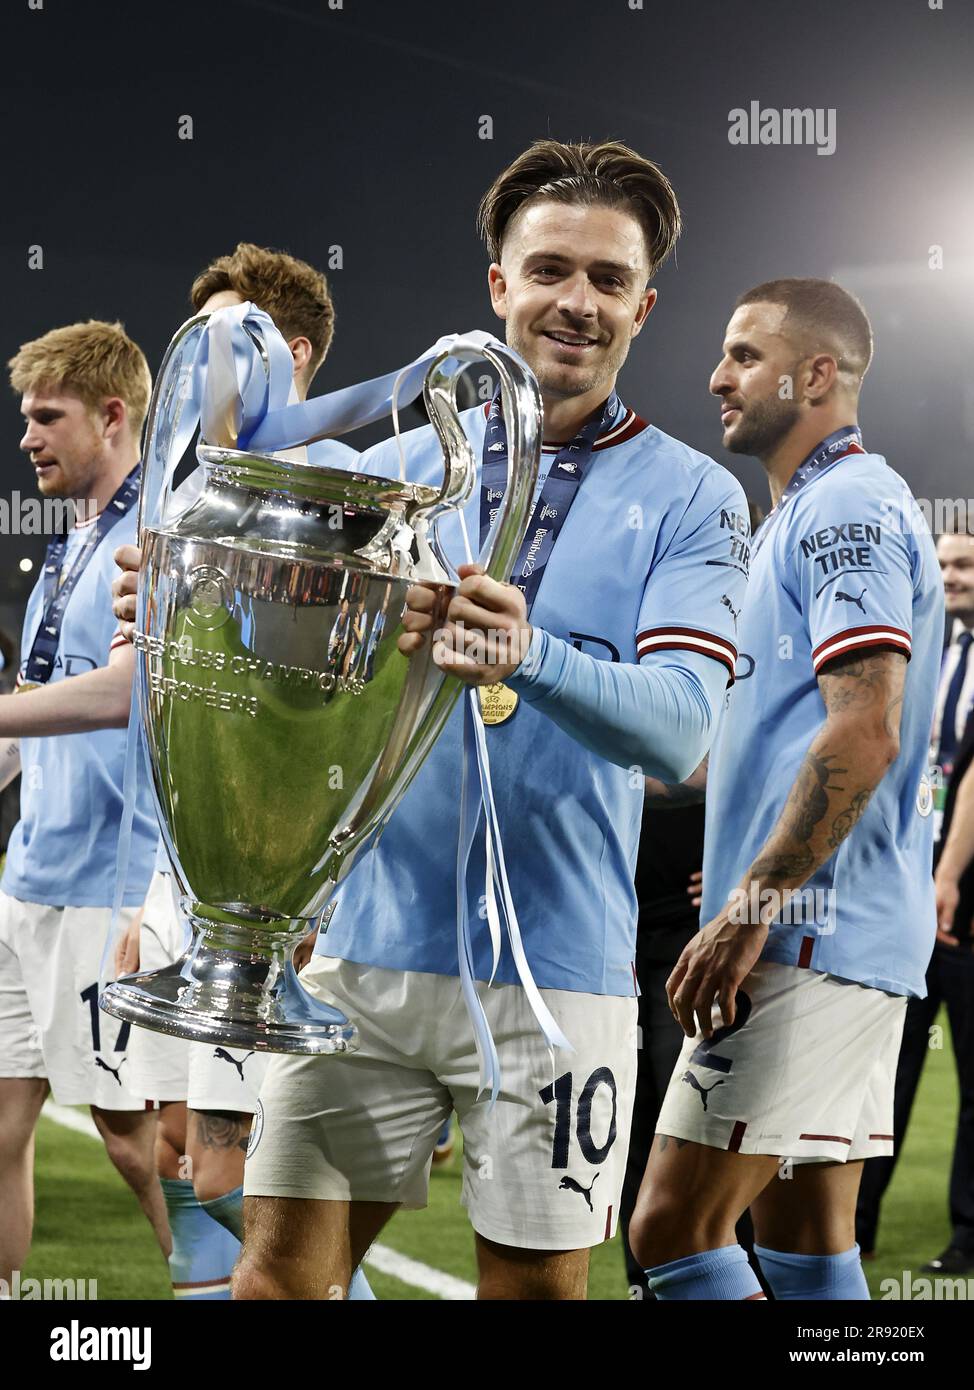 ISTANBUL - Jack Grealish of Manchester City FC with UEFA Champions